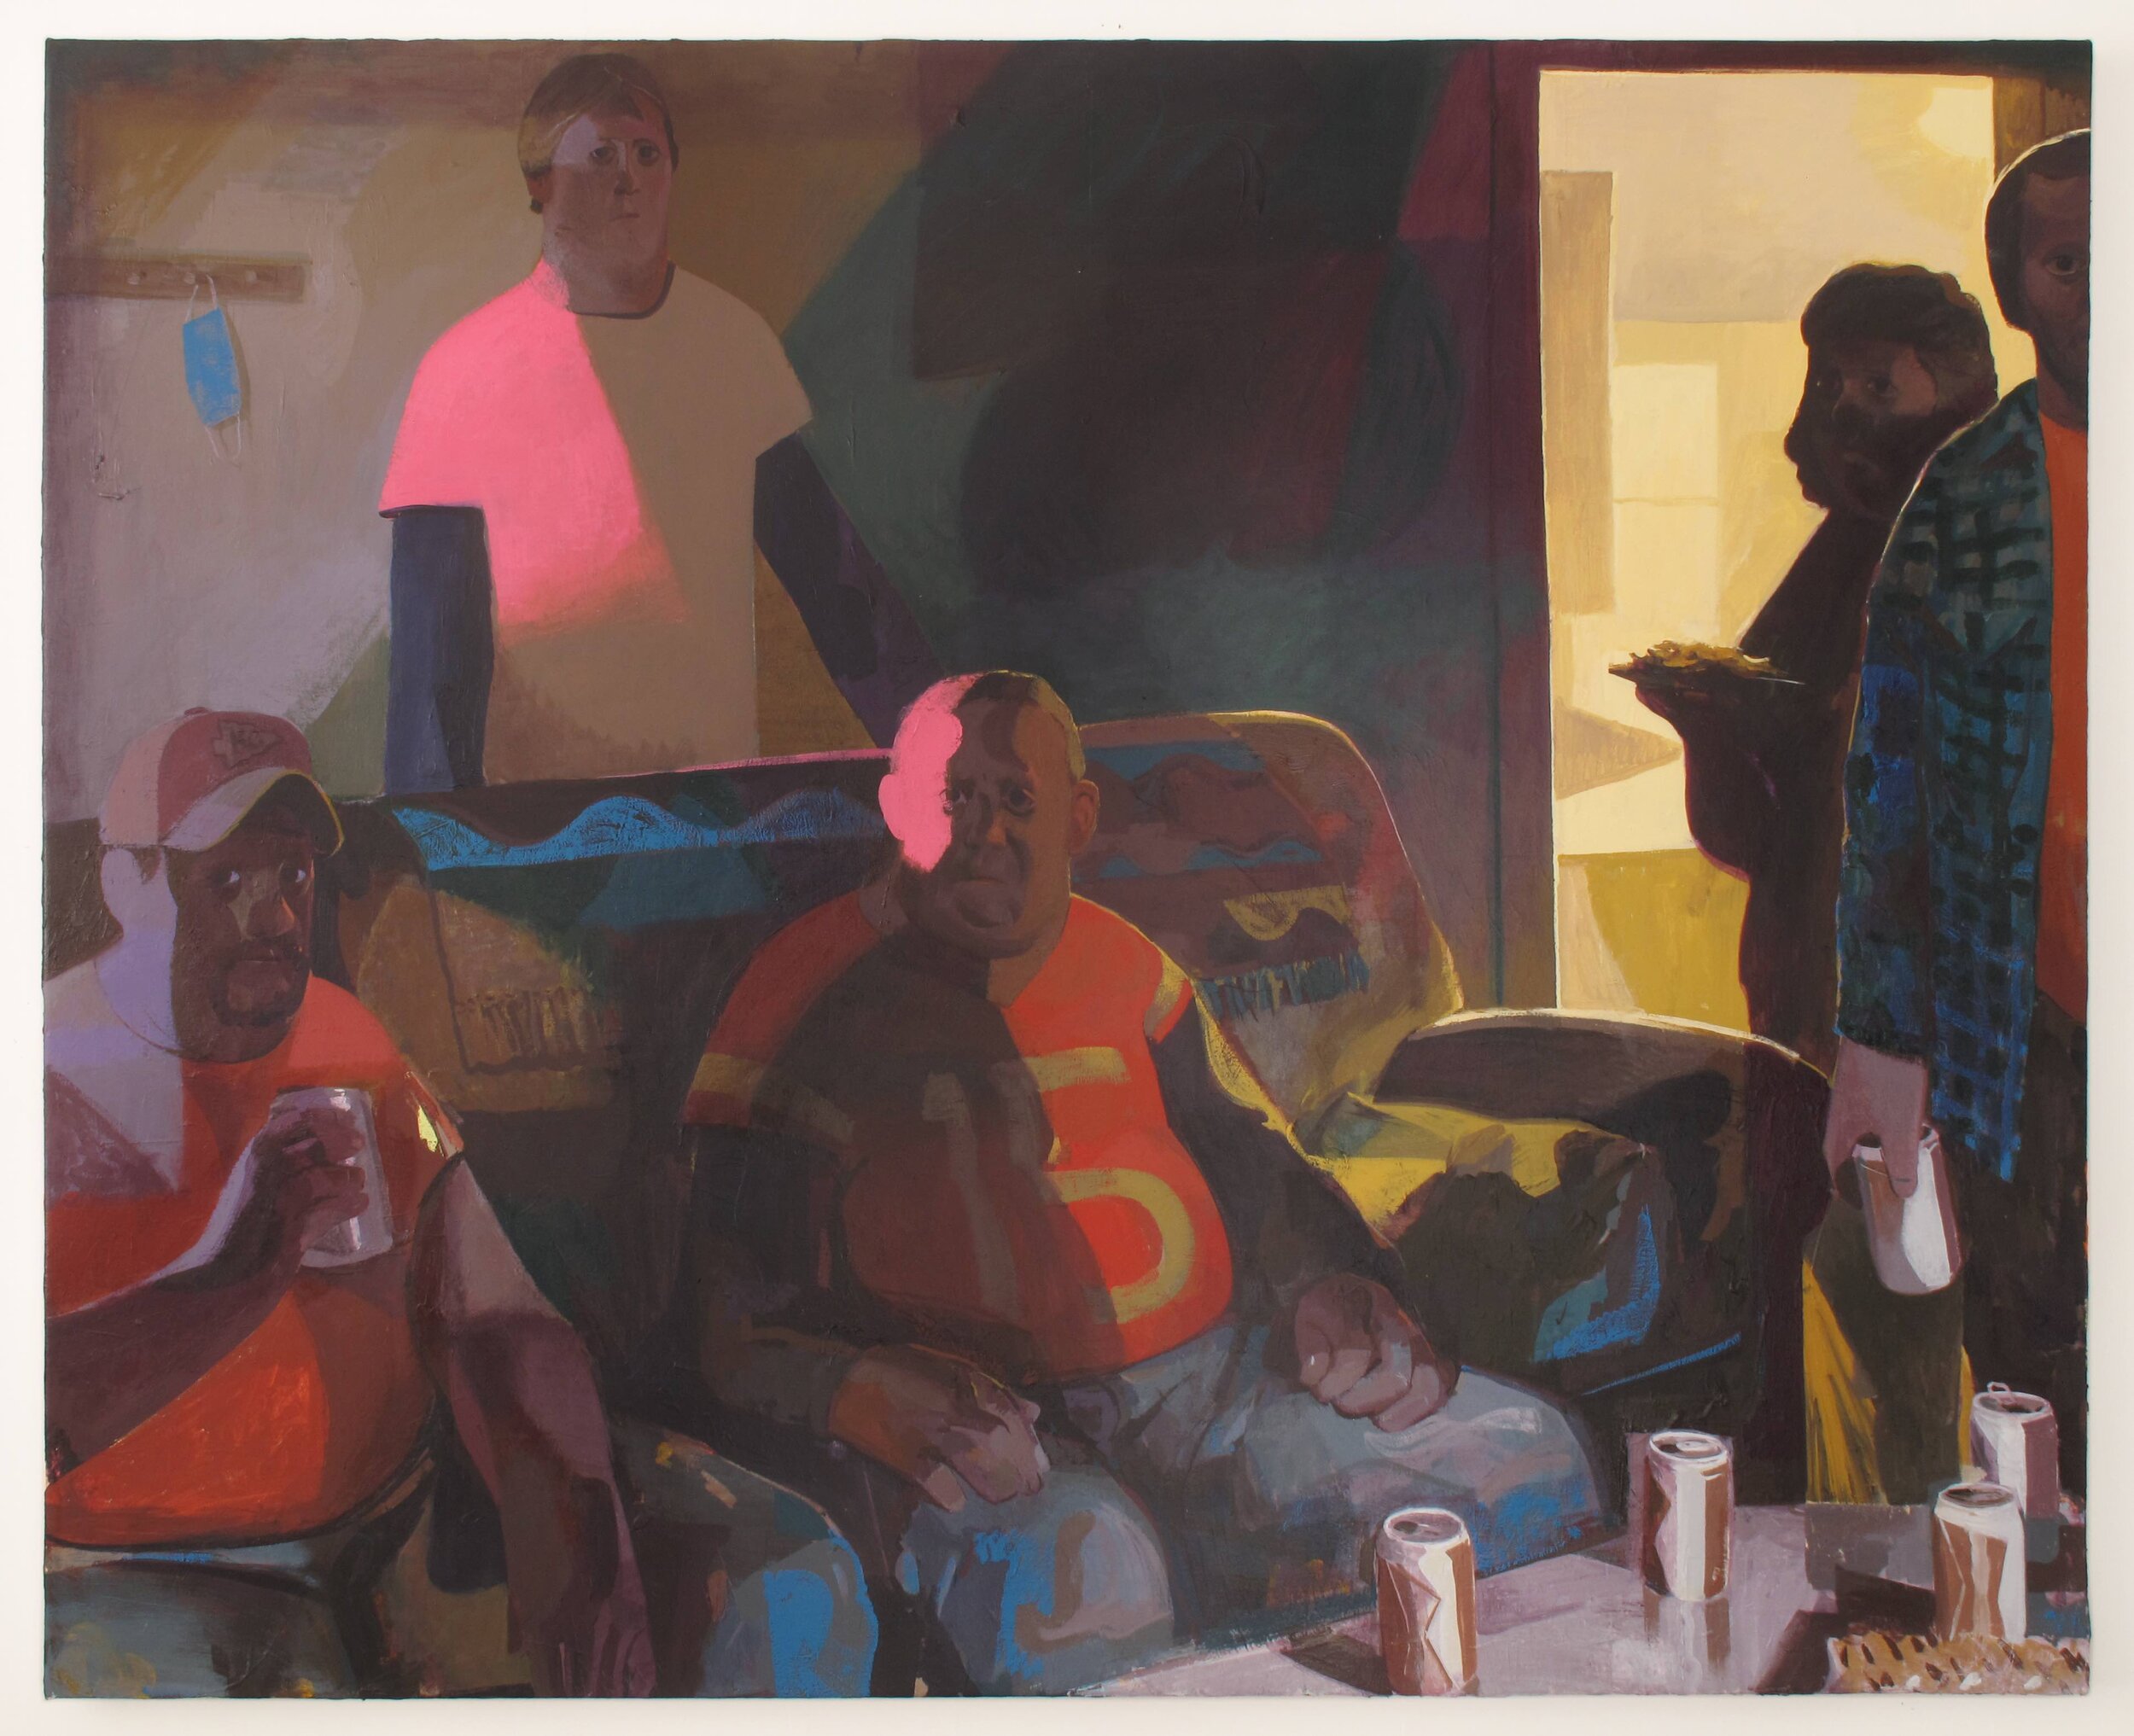   Super Bowl Sunday,  2021 , Flashe and acrylic on canvas, 48 x 60 in / 121.9x 152.4 cm 